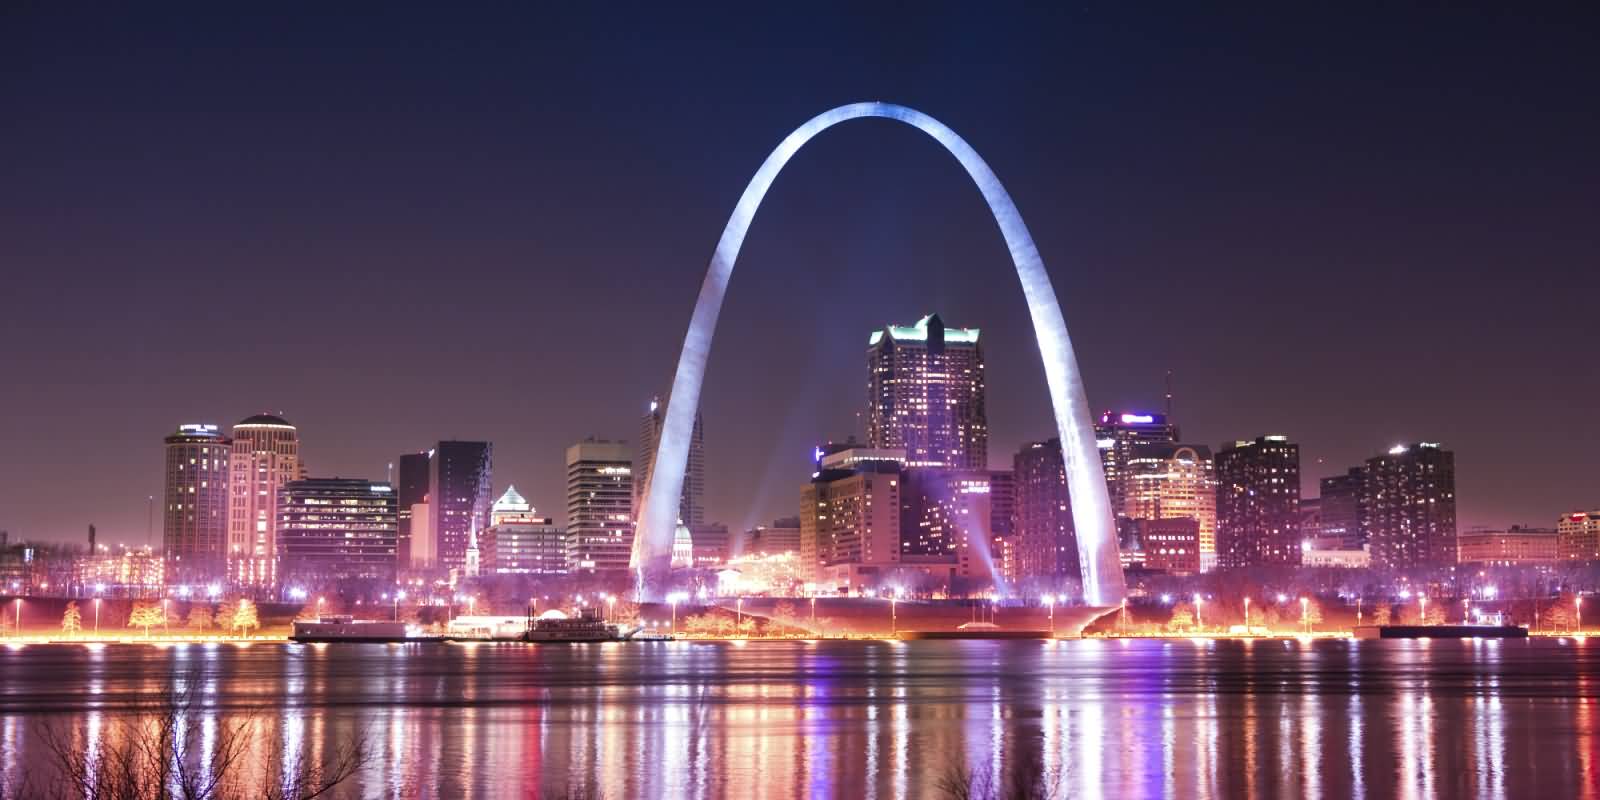 Gateway Arch And St. Louis Skyline At Night